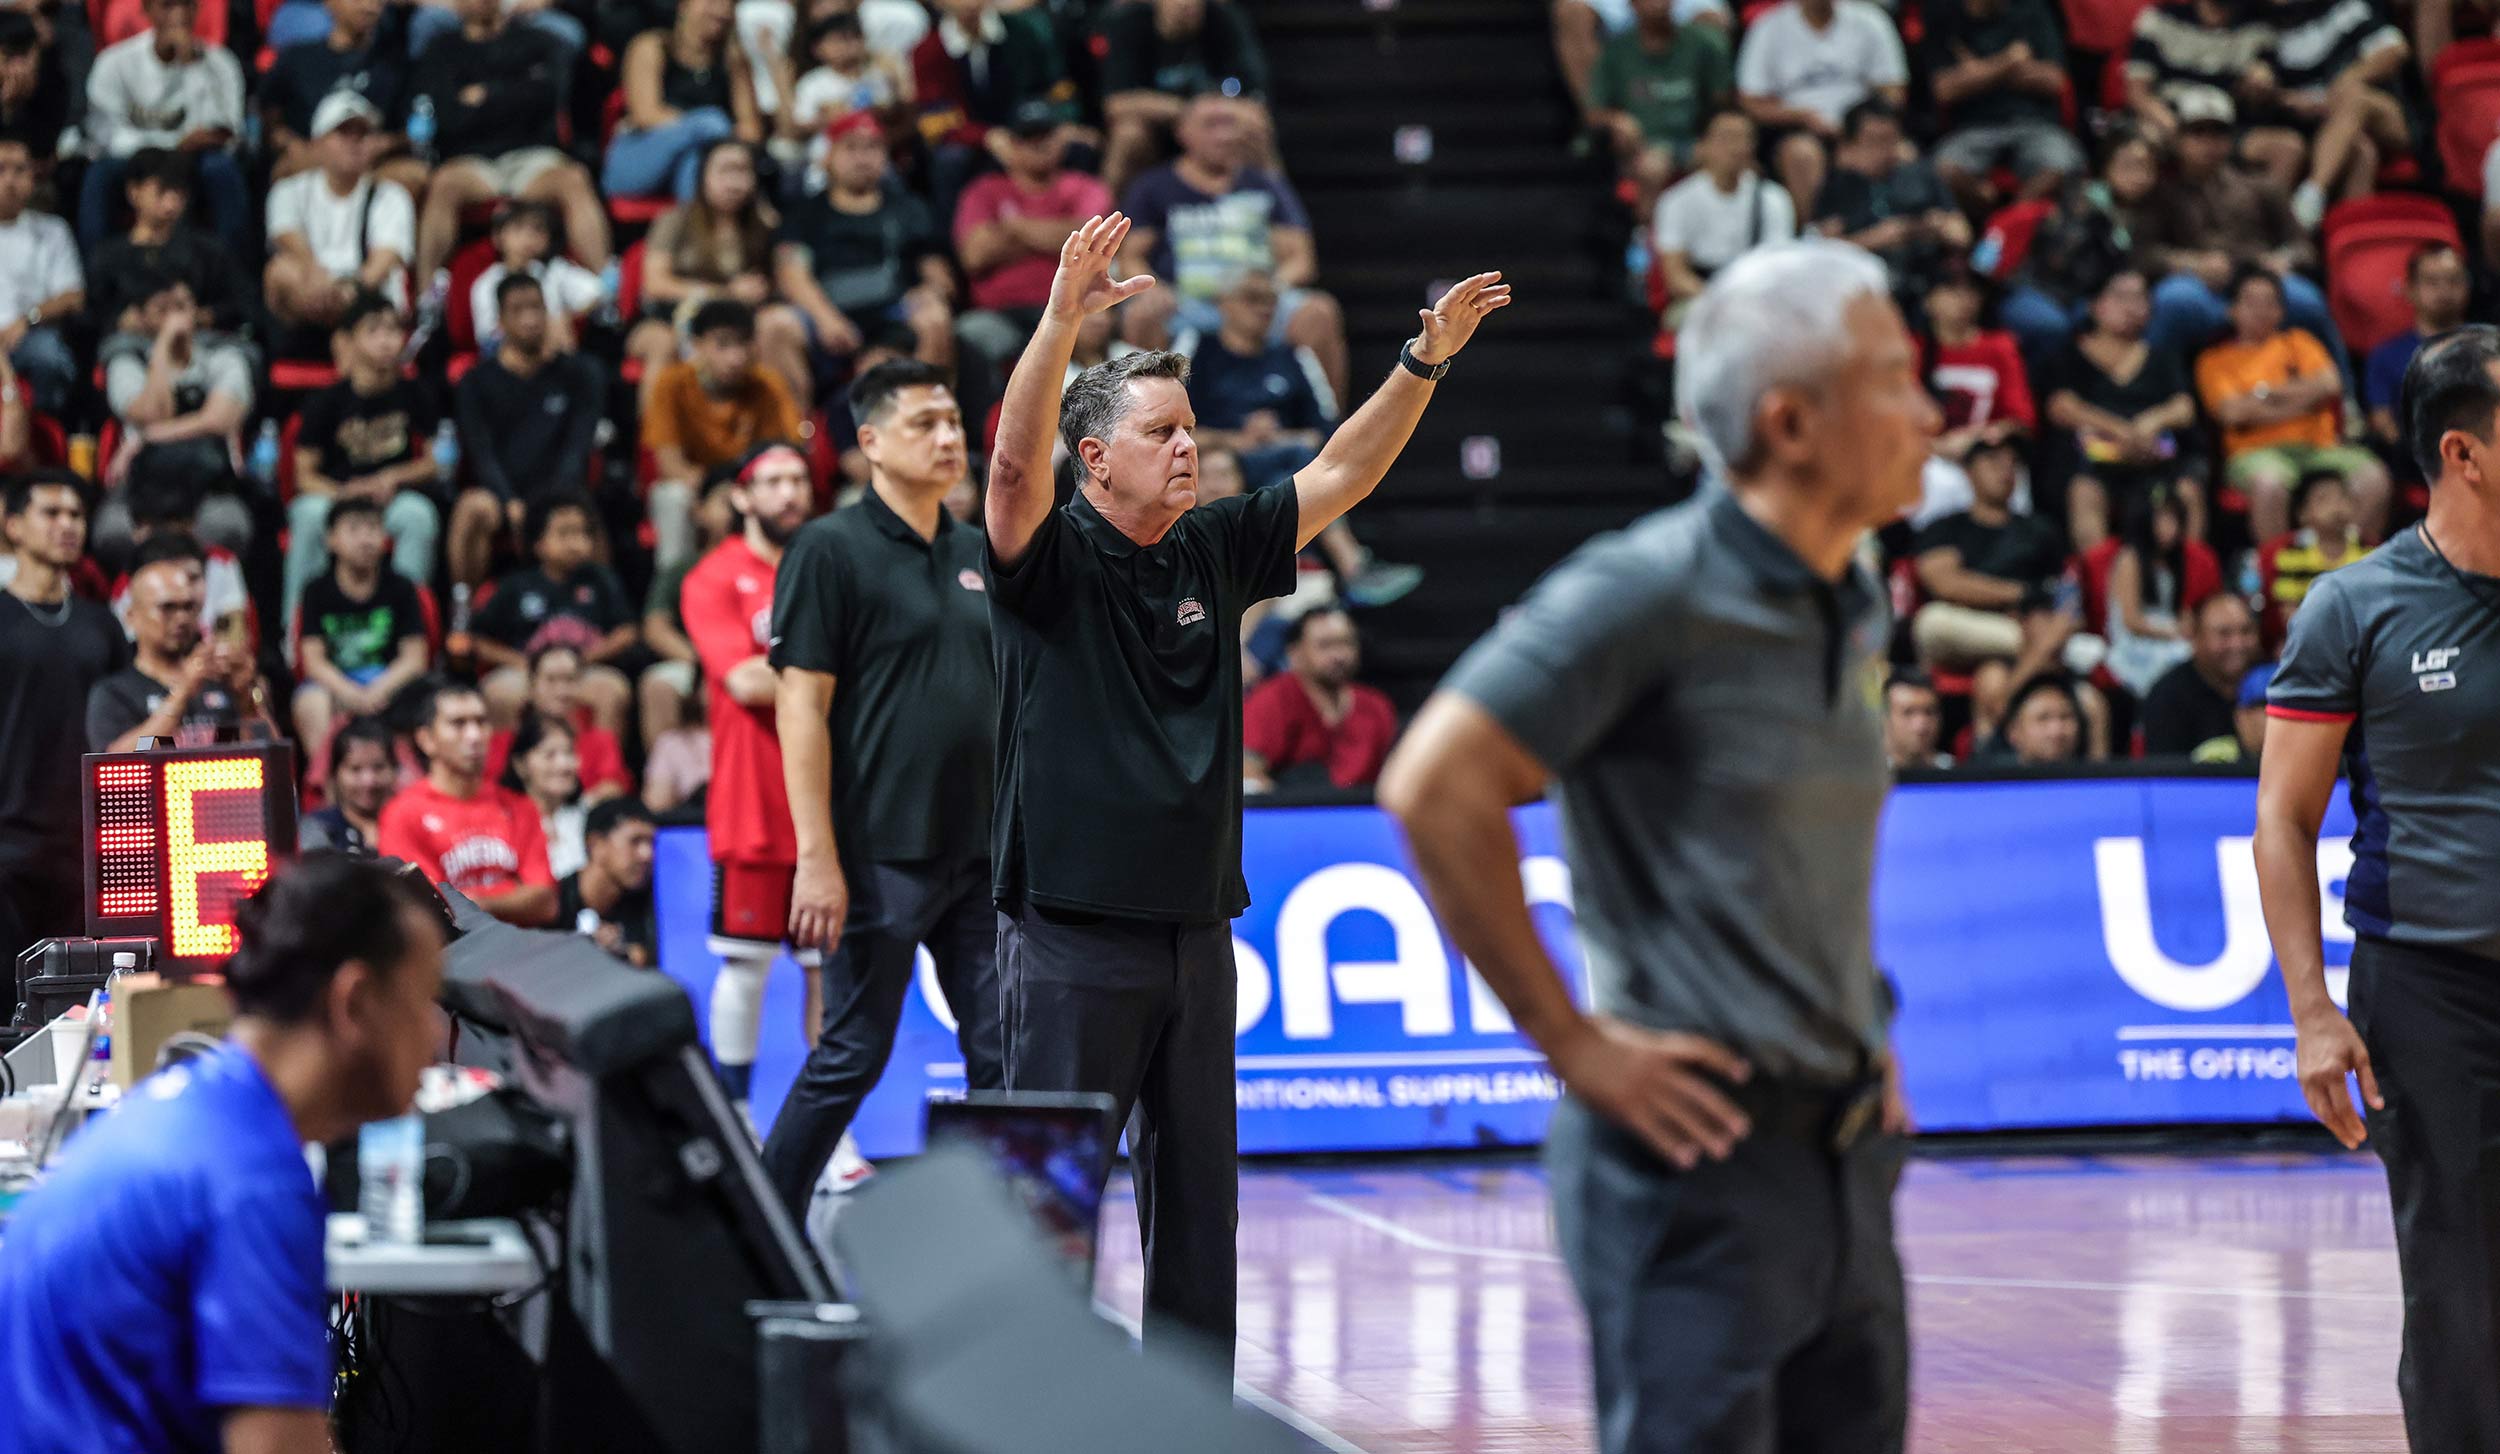 Ginebra coach Tim Cone and TNT coach Chot Reyes (foreground) during a PBA Philippine CUp game.